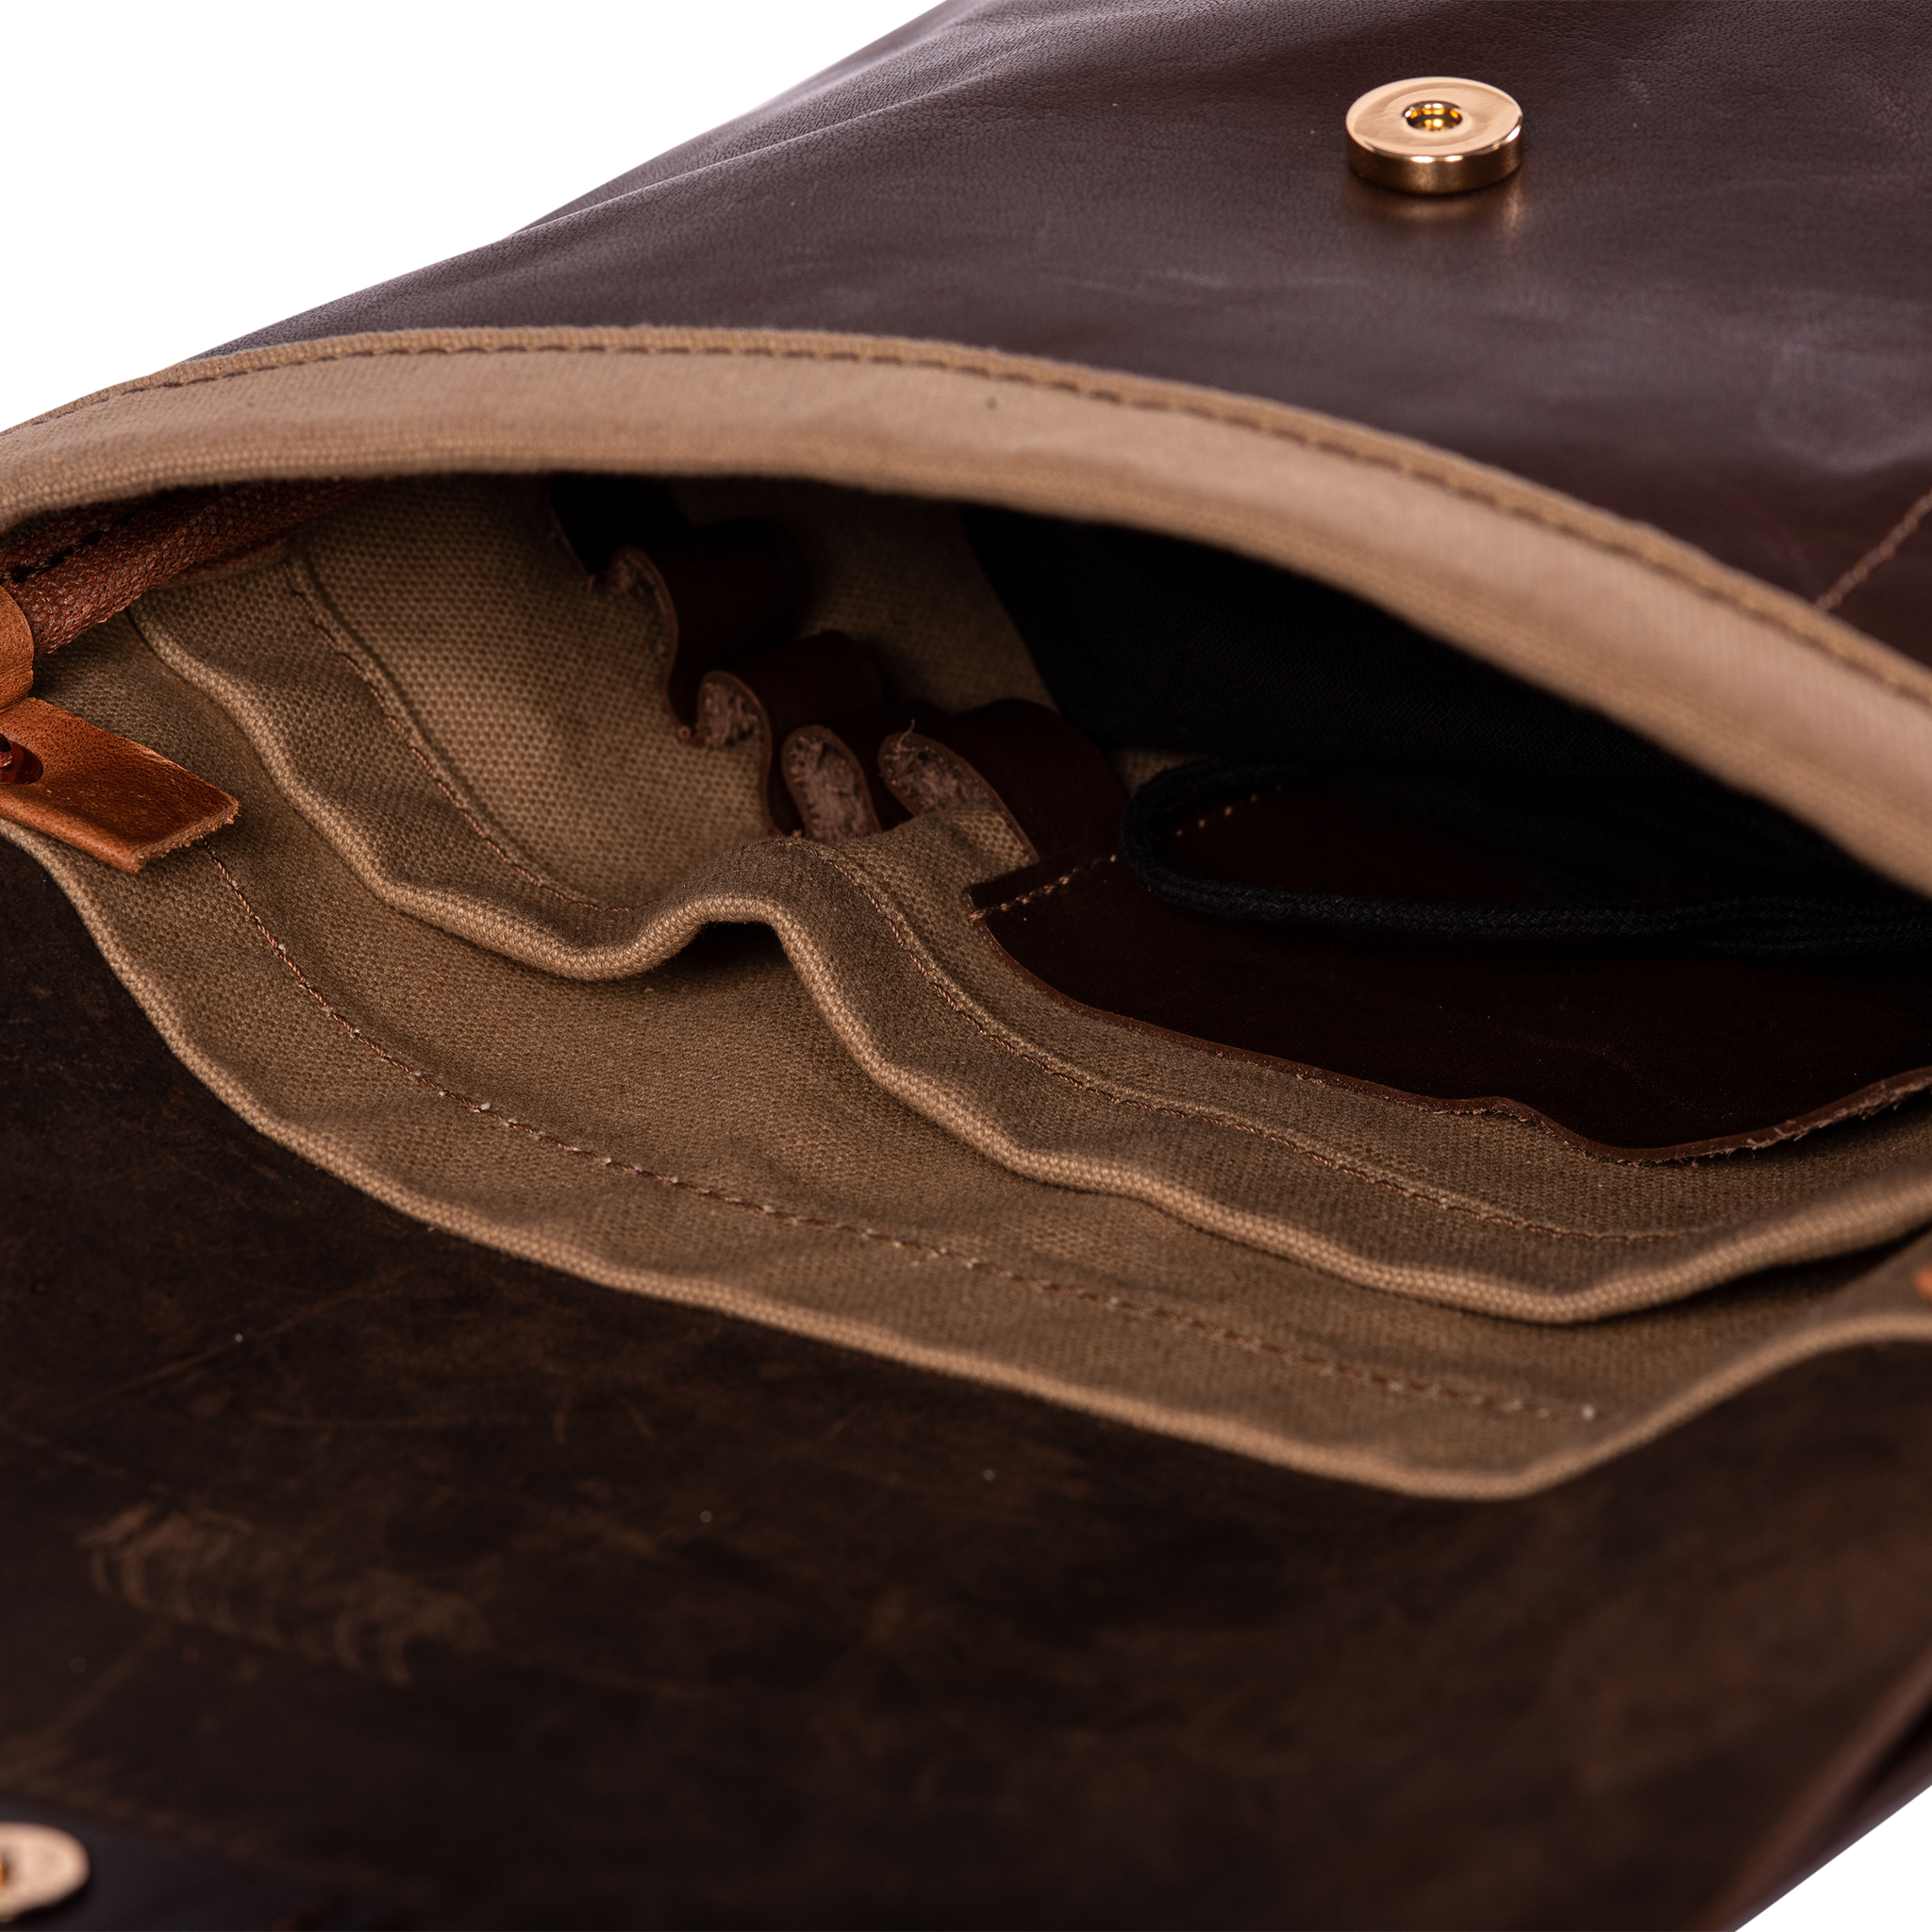 Mexico Duffle Bag, Light Brown Leather, Navy Lined, Butter Soft Leather